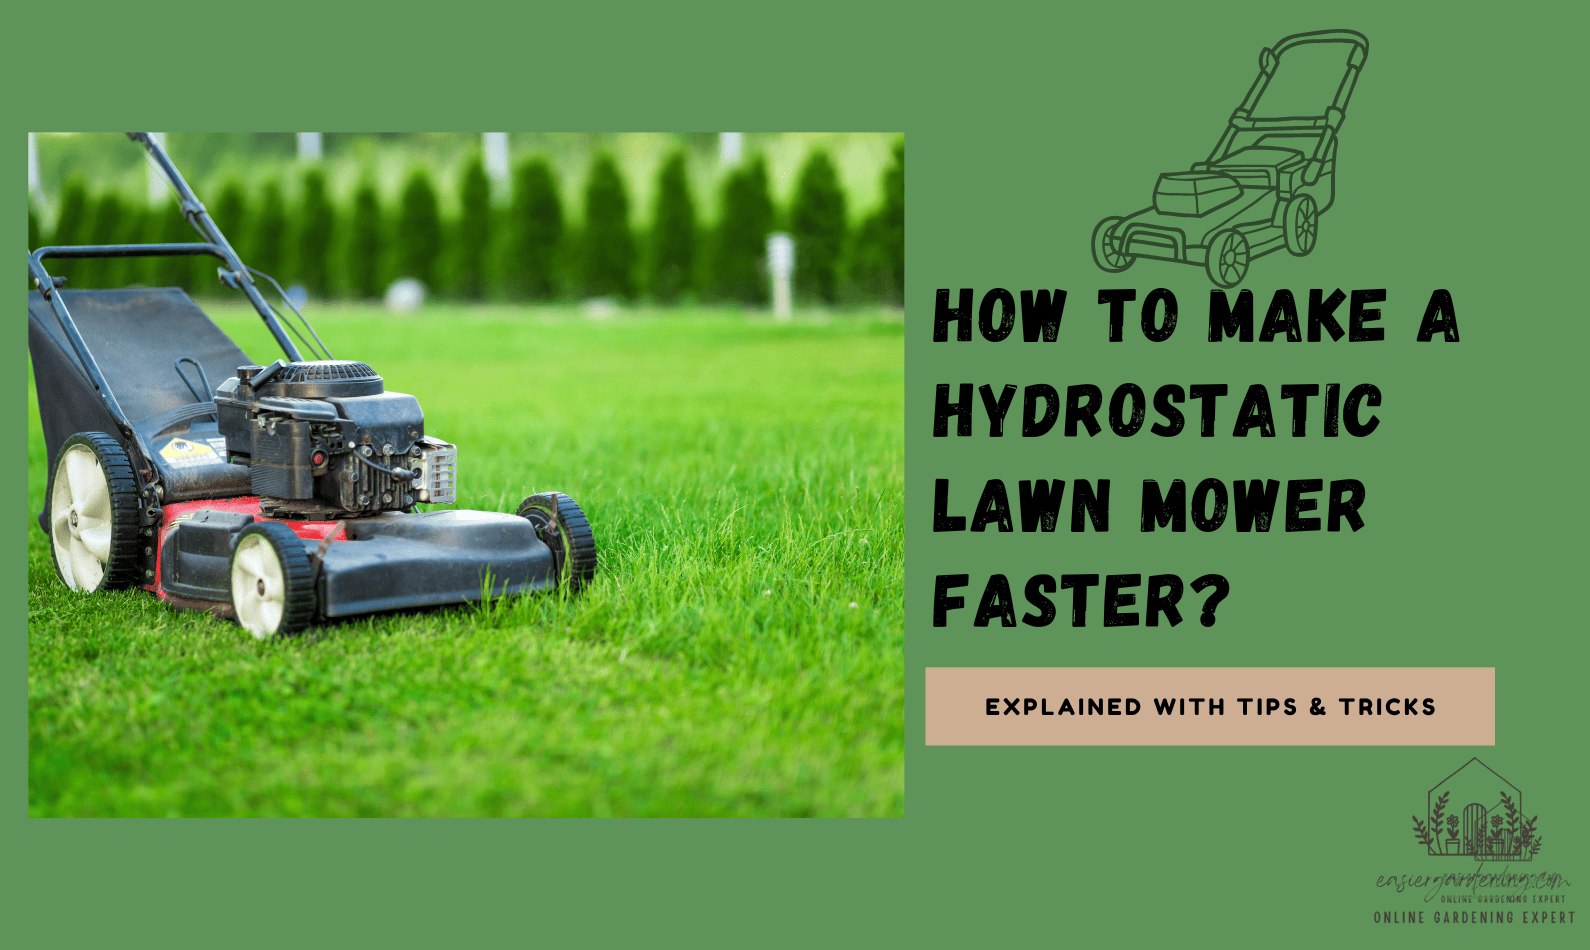 How to Make a Hydrostatic Lawn Mower Faster?